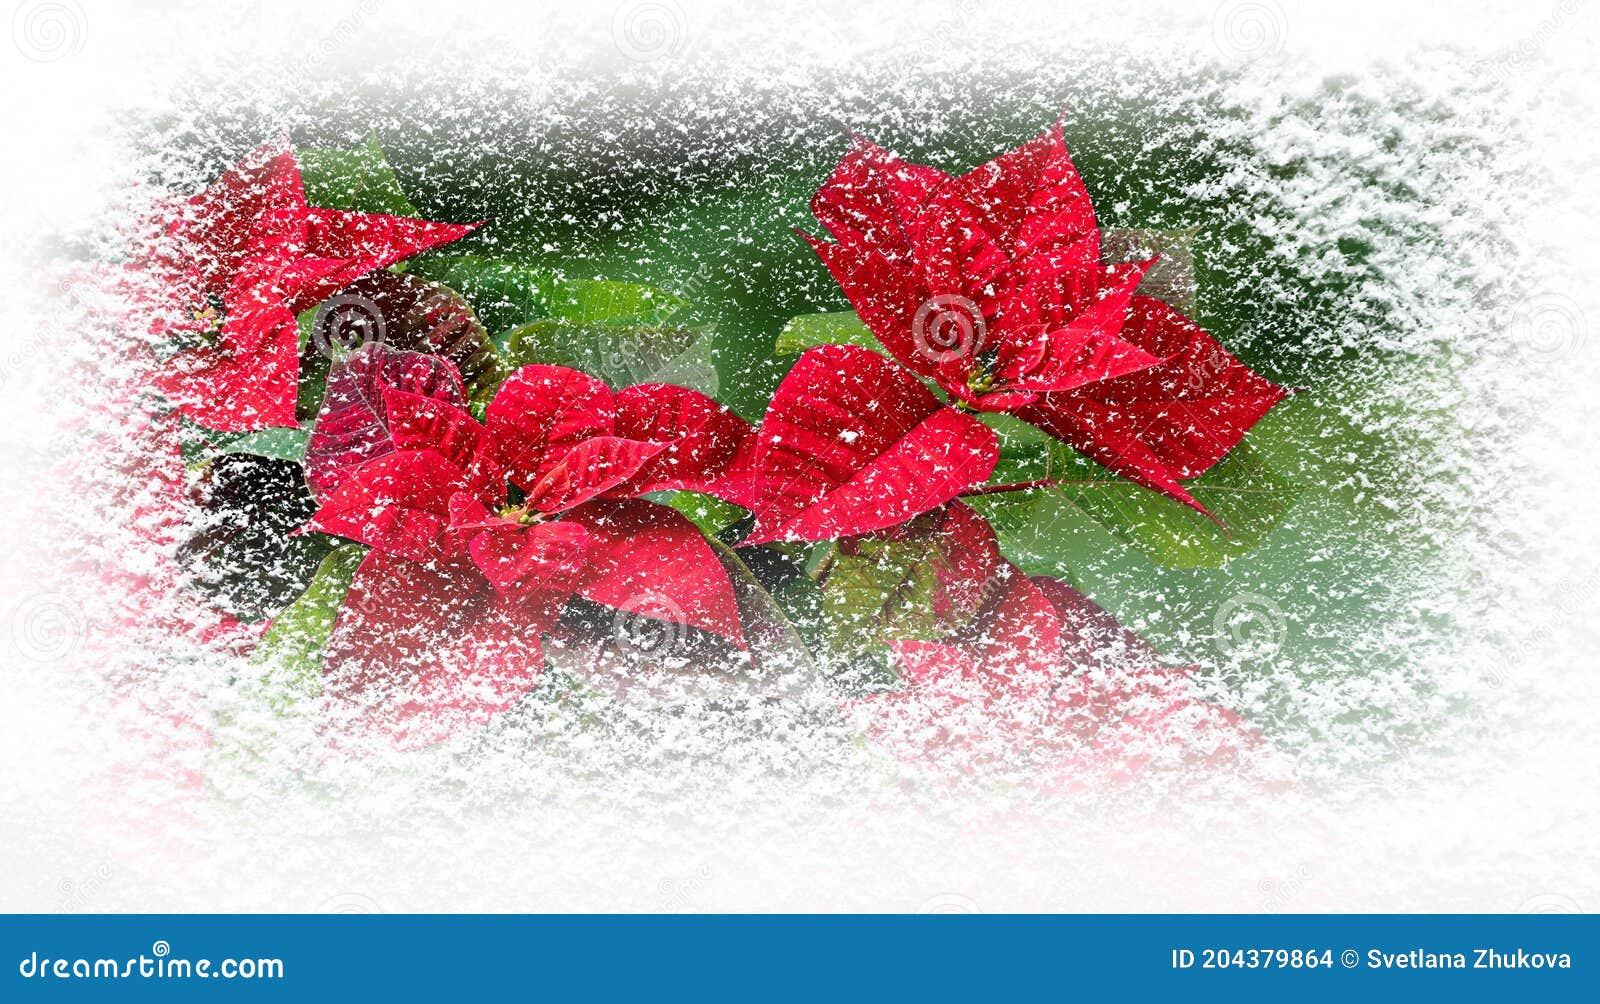 poinsettia flowers or flor de pascua in winter covered with snowfall greating card